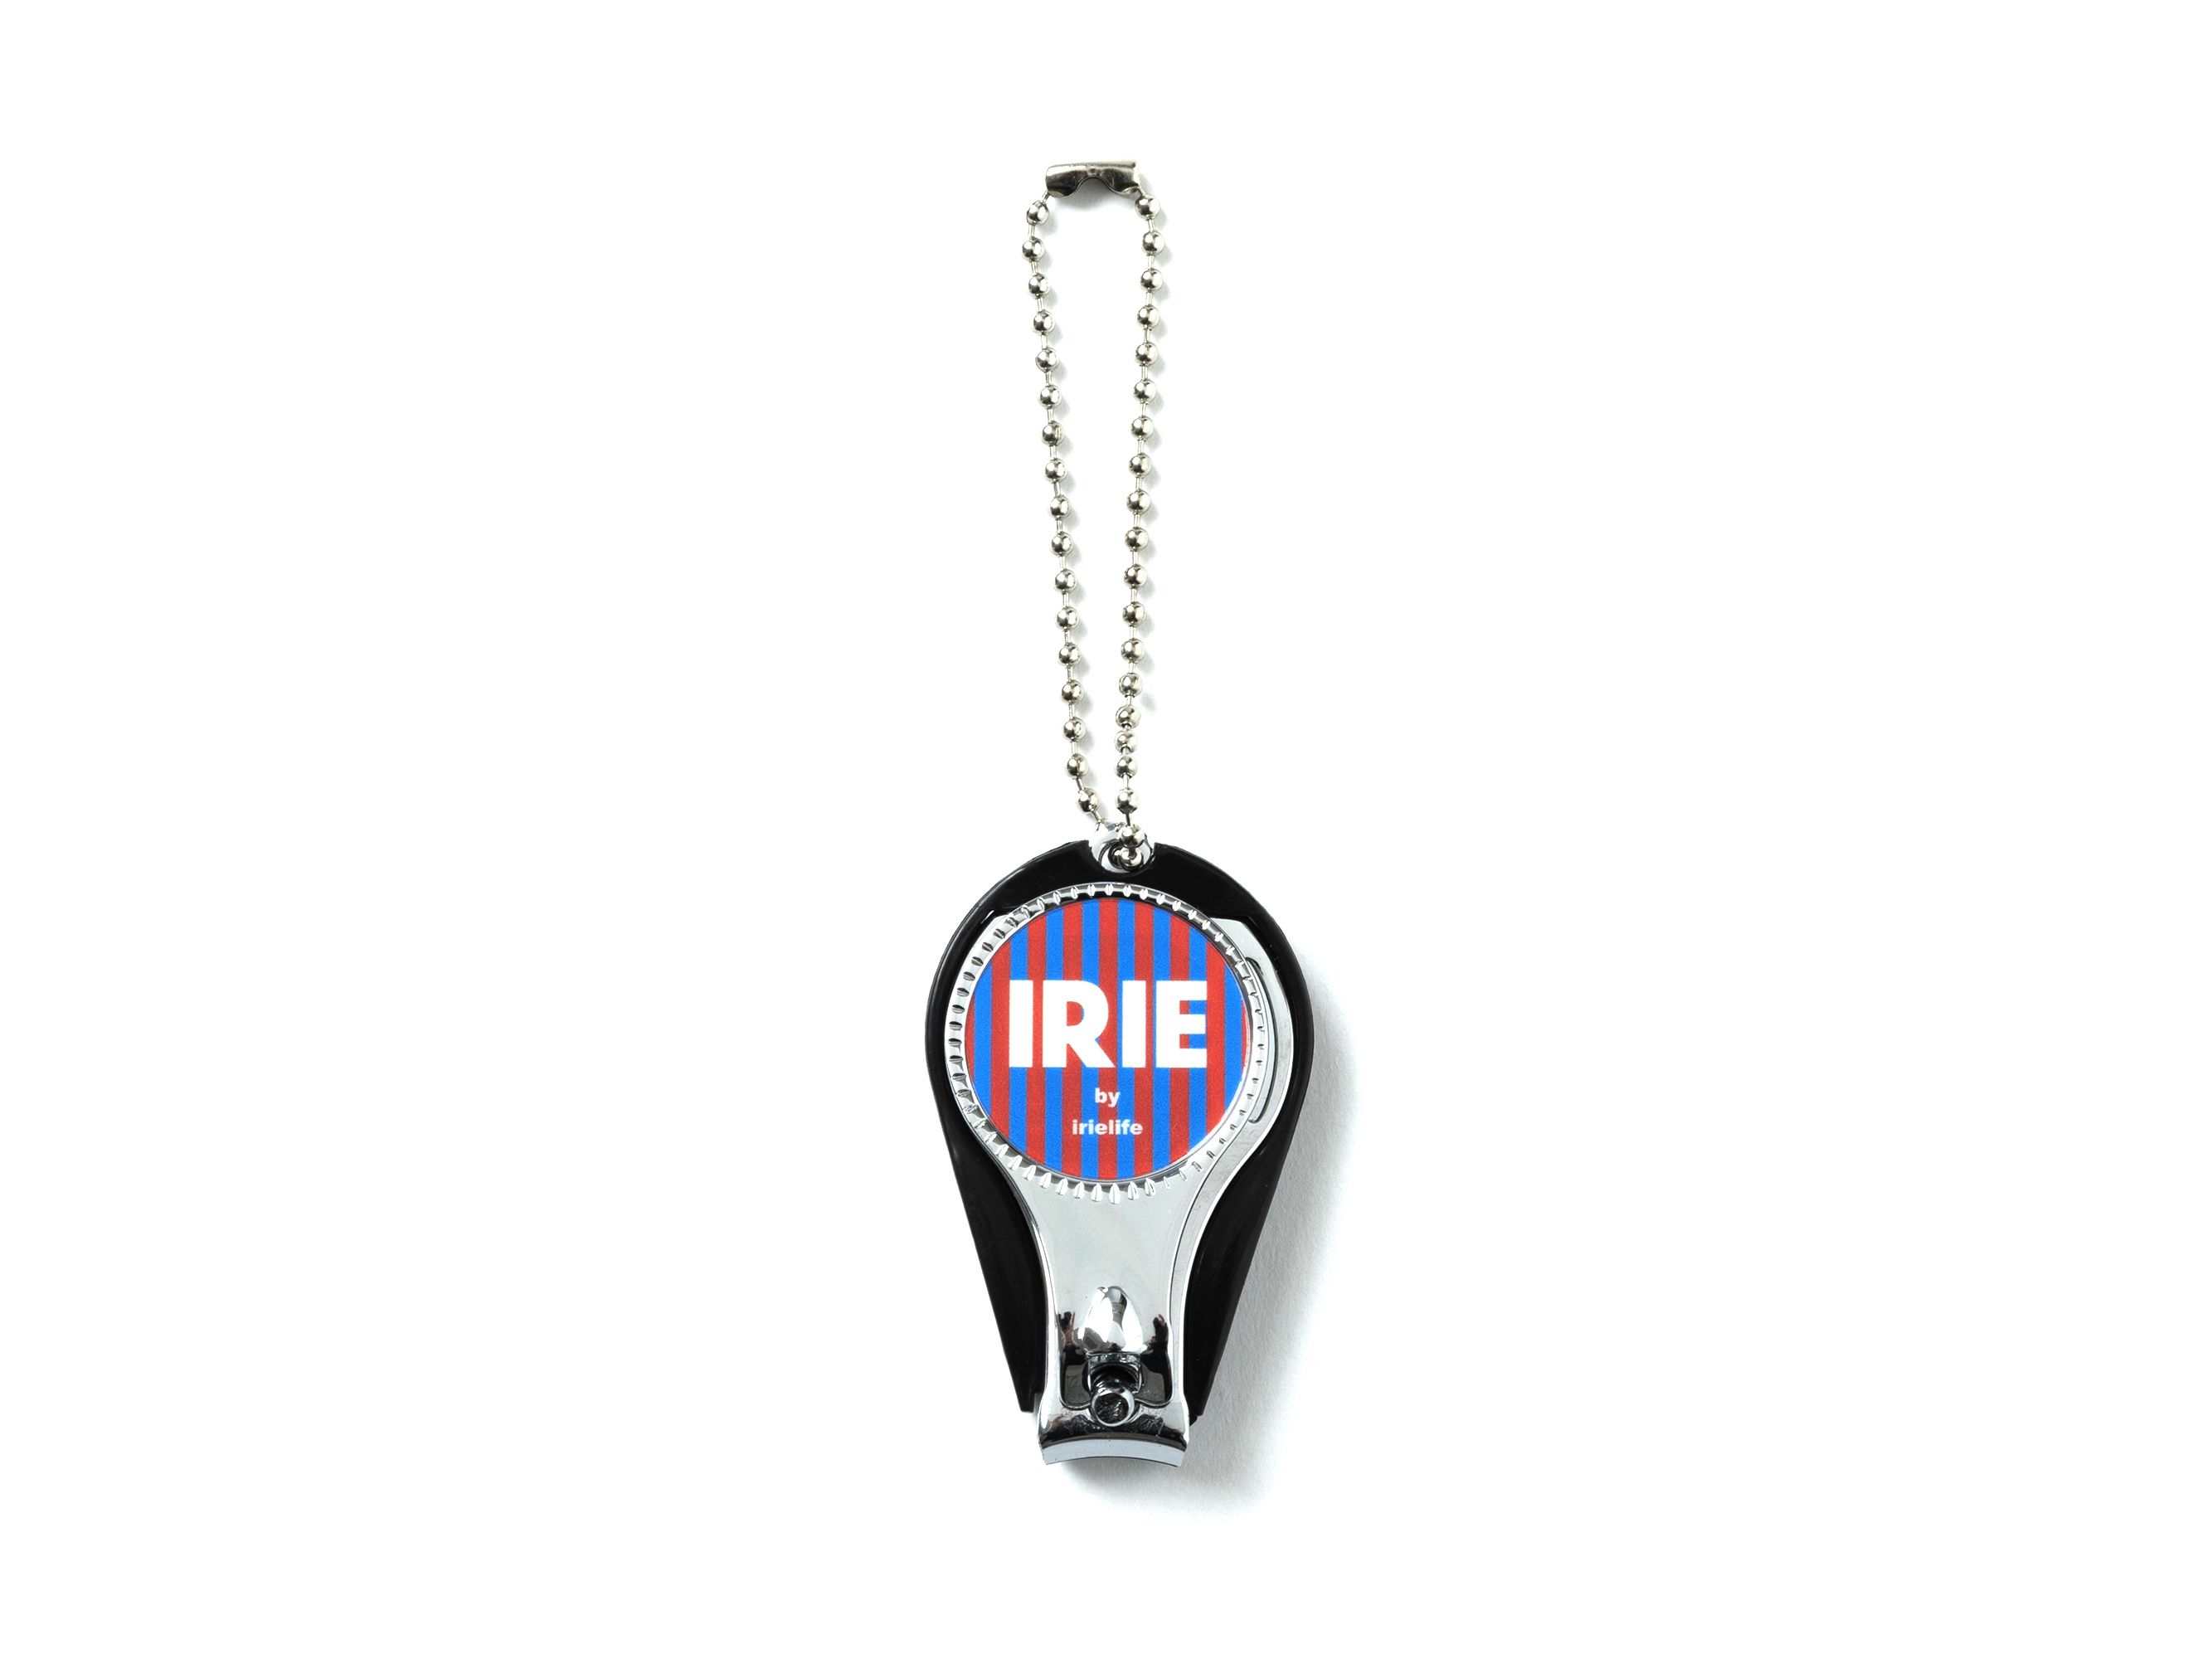 【20%OFF】NAIL CRIPPERS KEYHOLDER - IRIE by irielife